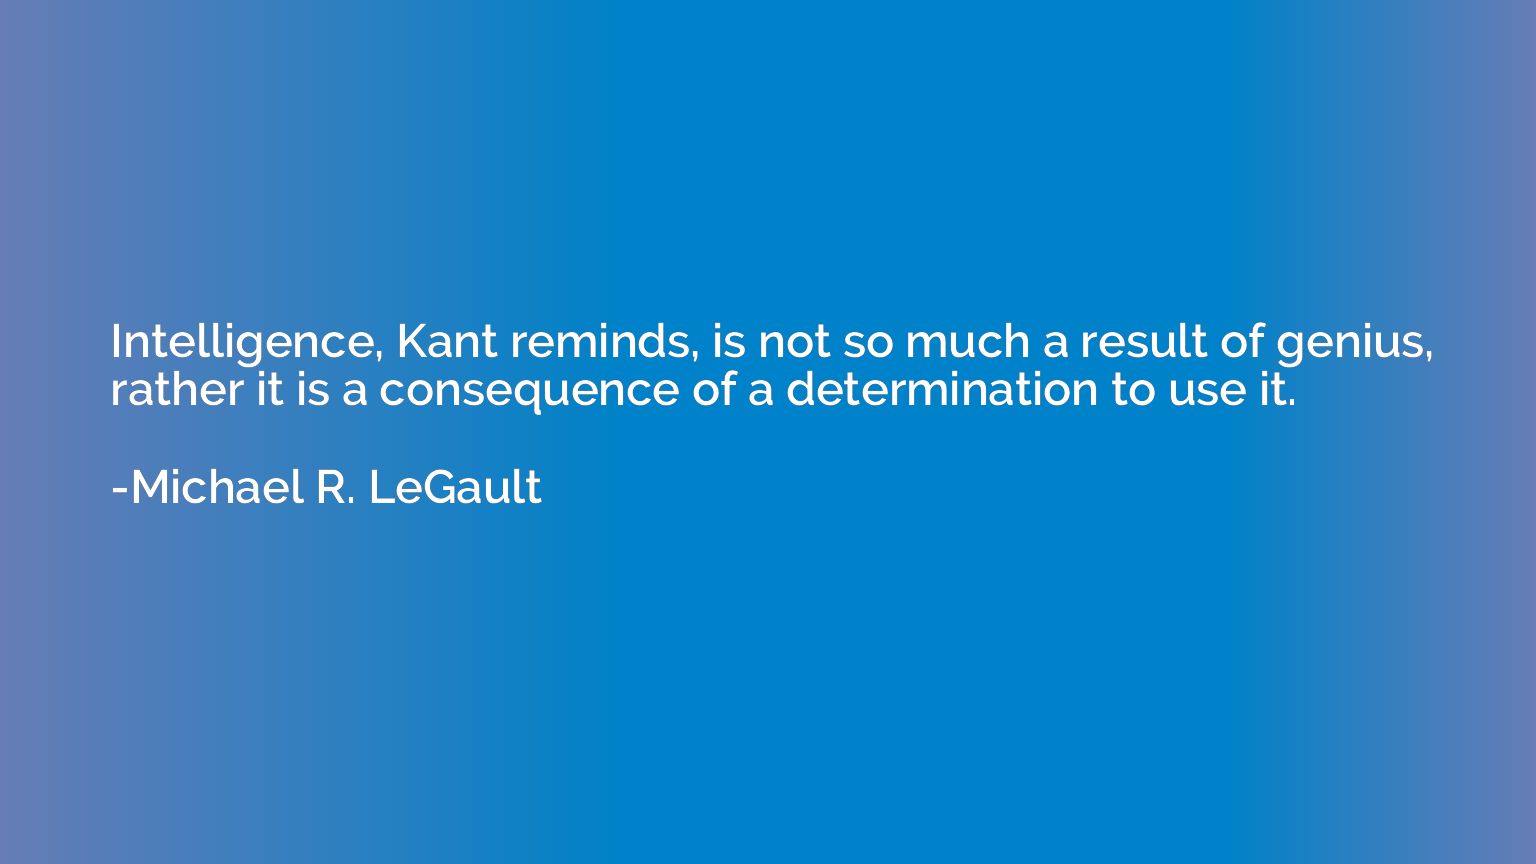 Intelligence, Kant reminds, is not so much a result of geniu